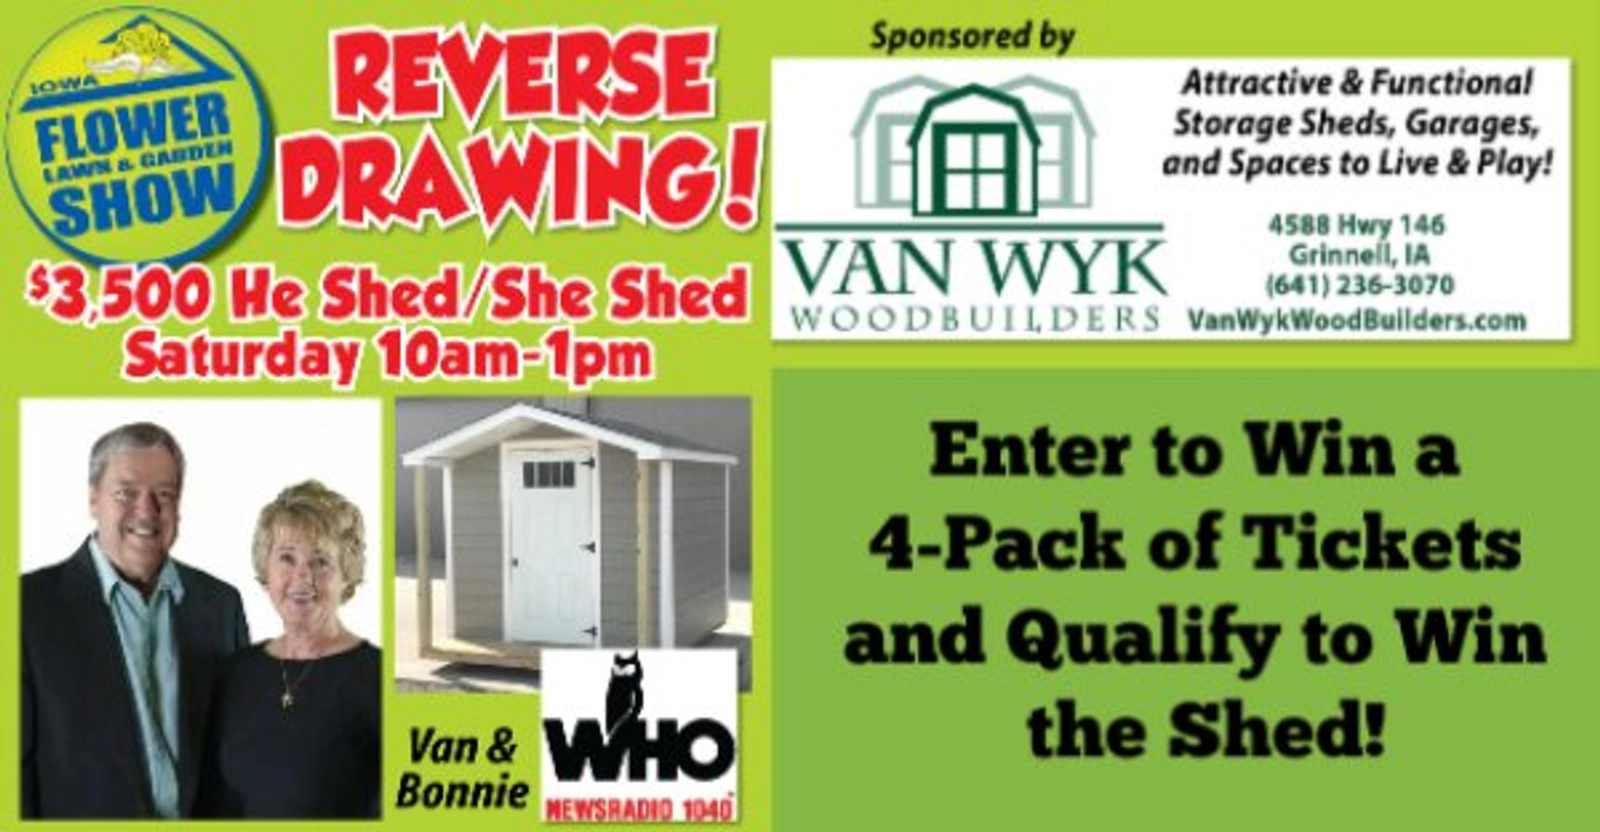  "He Shed/She Shed" Sweepstakes with Van & Bonnie - Thumbnail Image